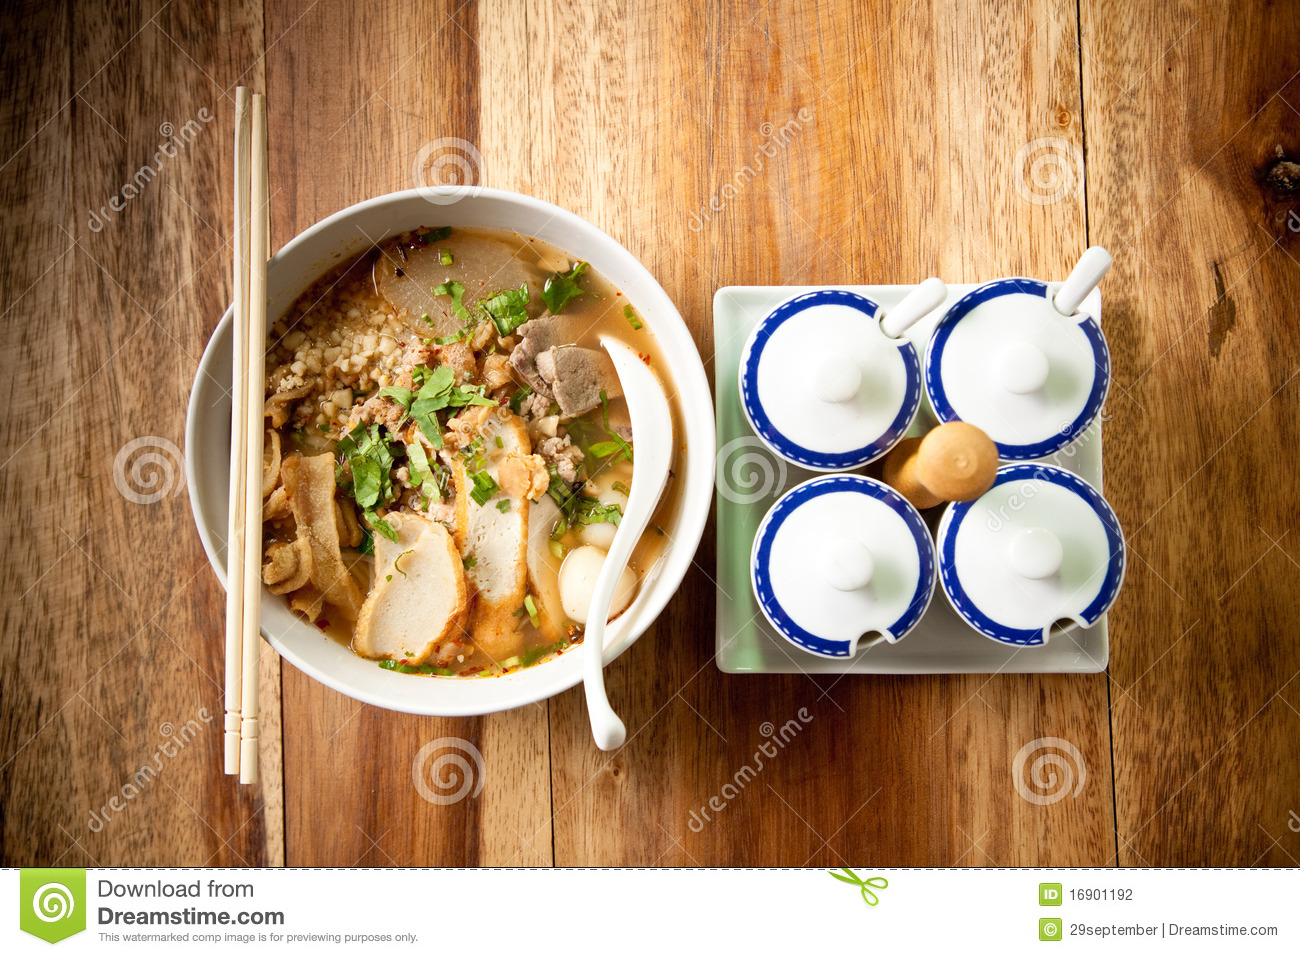 Thai Noodle Spicy  Stock Photography   Image  16901192